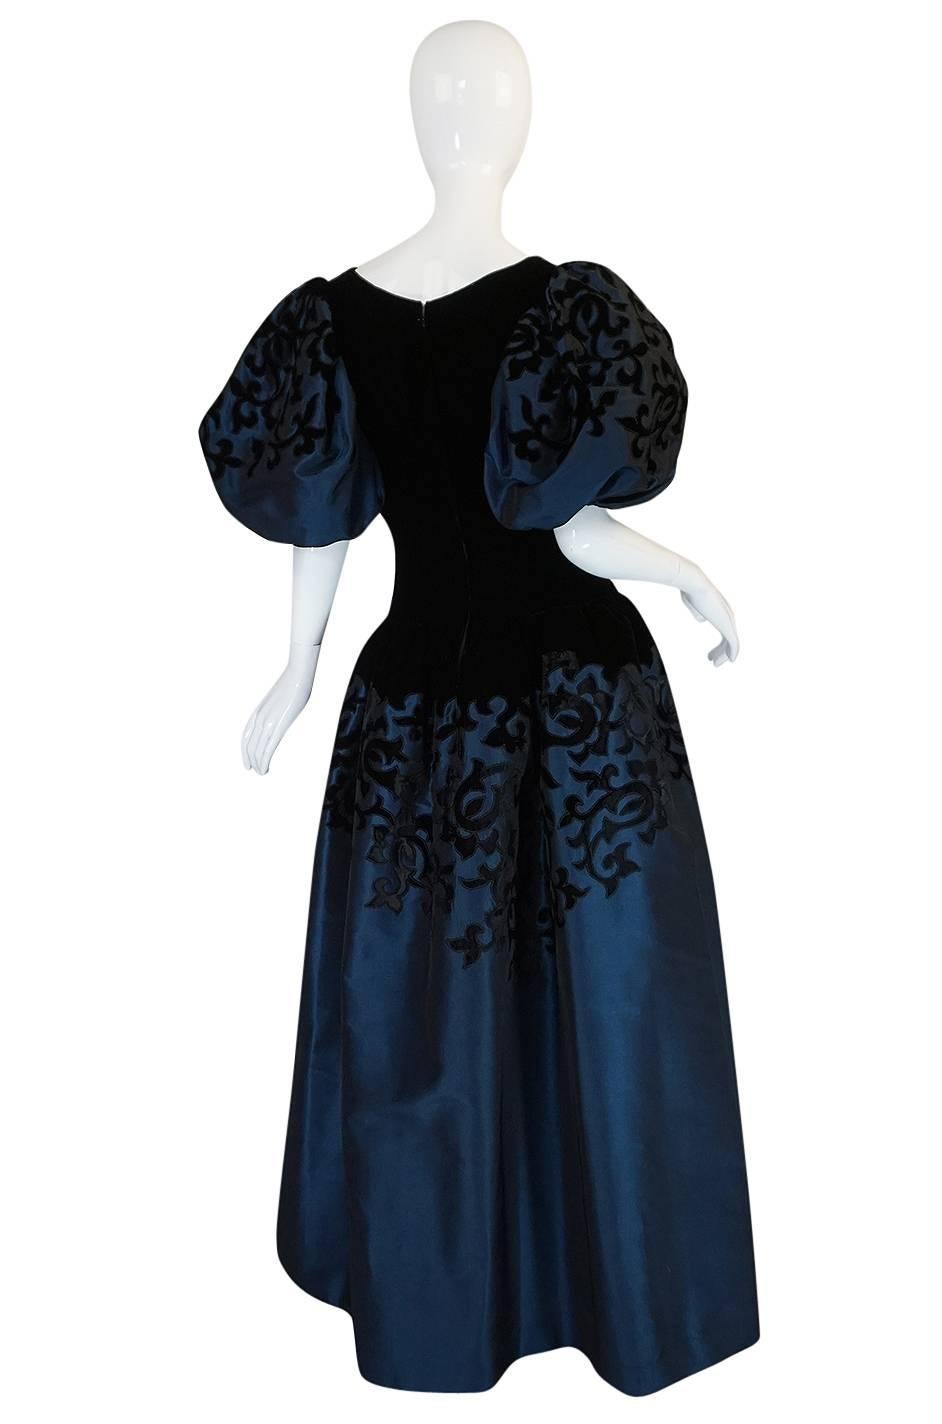 This beautiful and regal feeling gown by Oscar de la Renta is even better in real life. That classic combination of a deep, rich blue silk taffeta with the black velvet applique and bodice is spectacular. It is also cut in a beautiful sculpted way